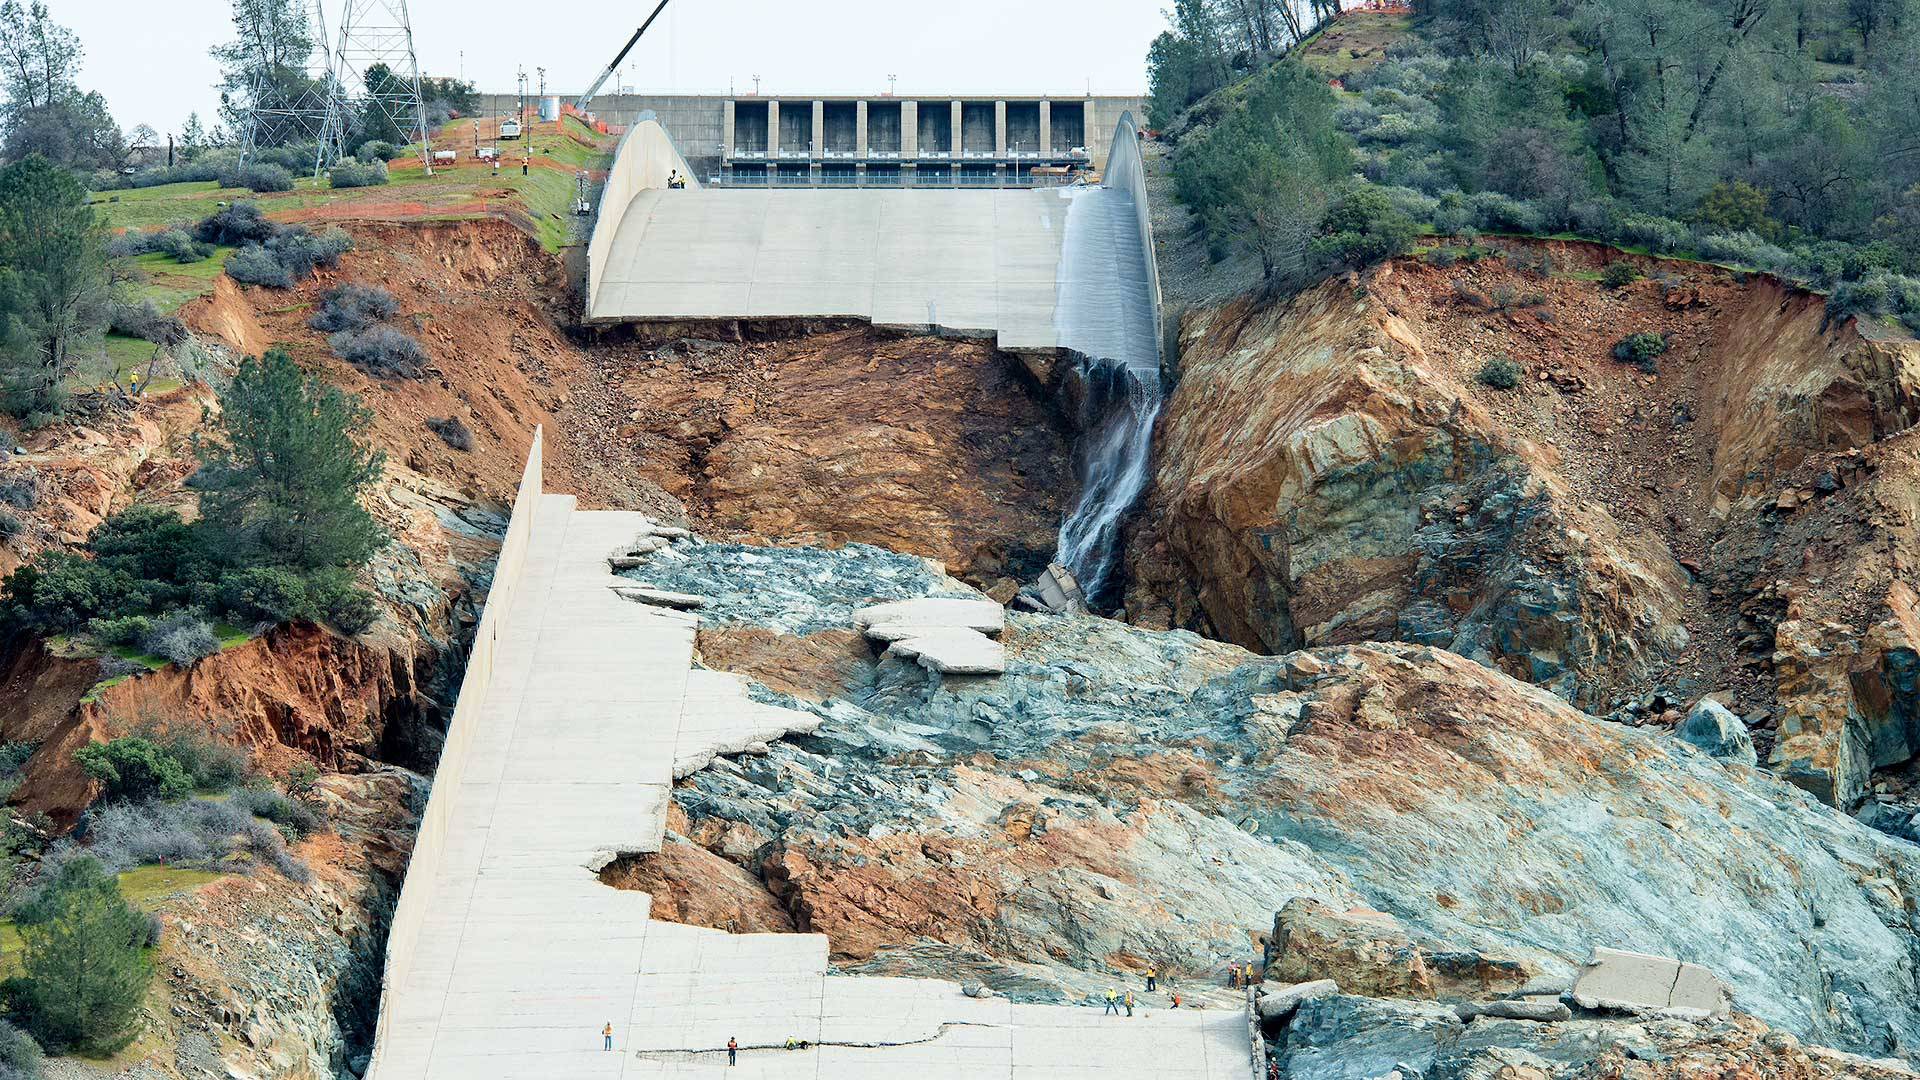 Ruins of the main spillway at Oroville Dam reveal a blend of "fresh" (blue-gray) rock and "weathered" (reddish-brown) rock underneath. Calif. Dept. of Water Resources